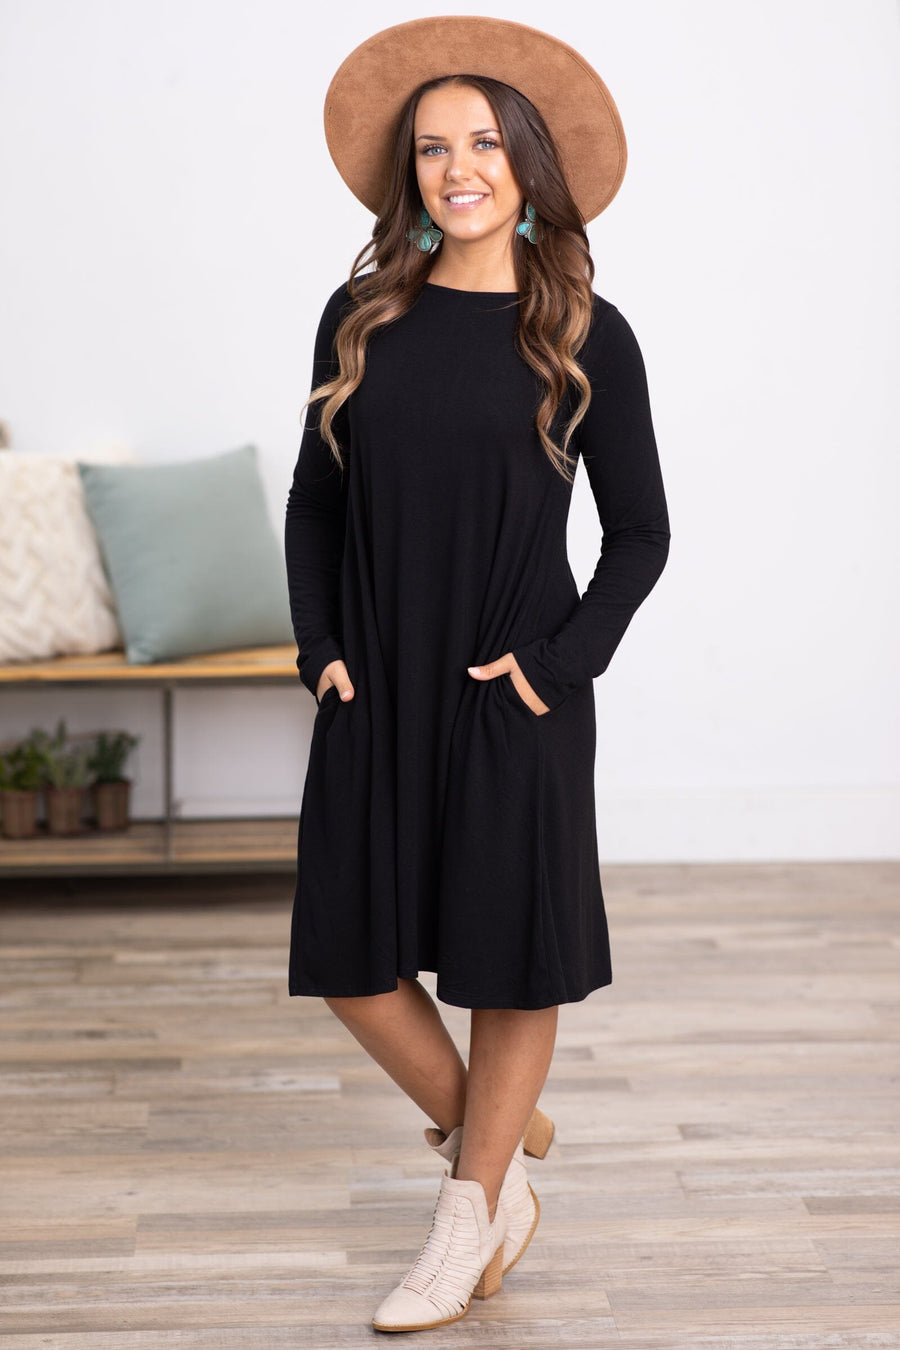 Zenana Dresses  Shop Maxi, Tiered & More at Filly Flair Boutique